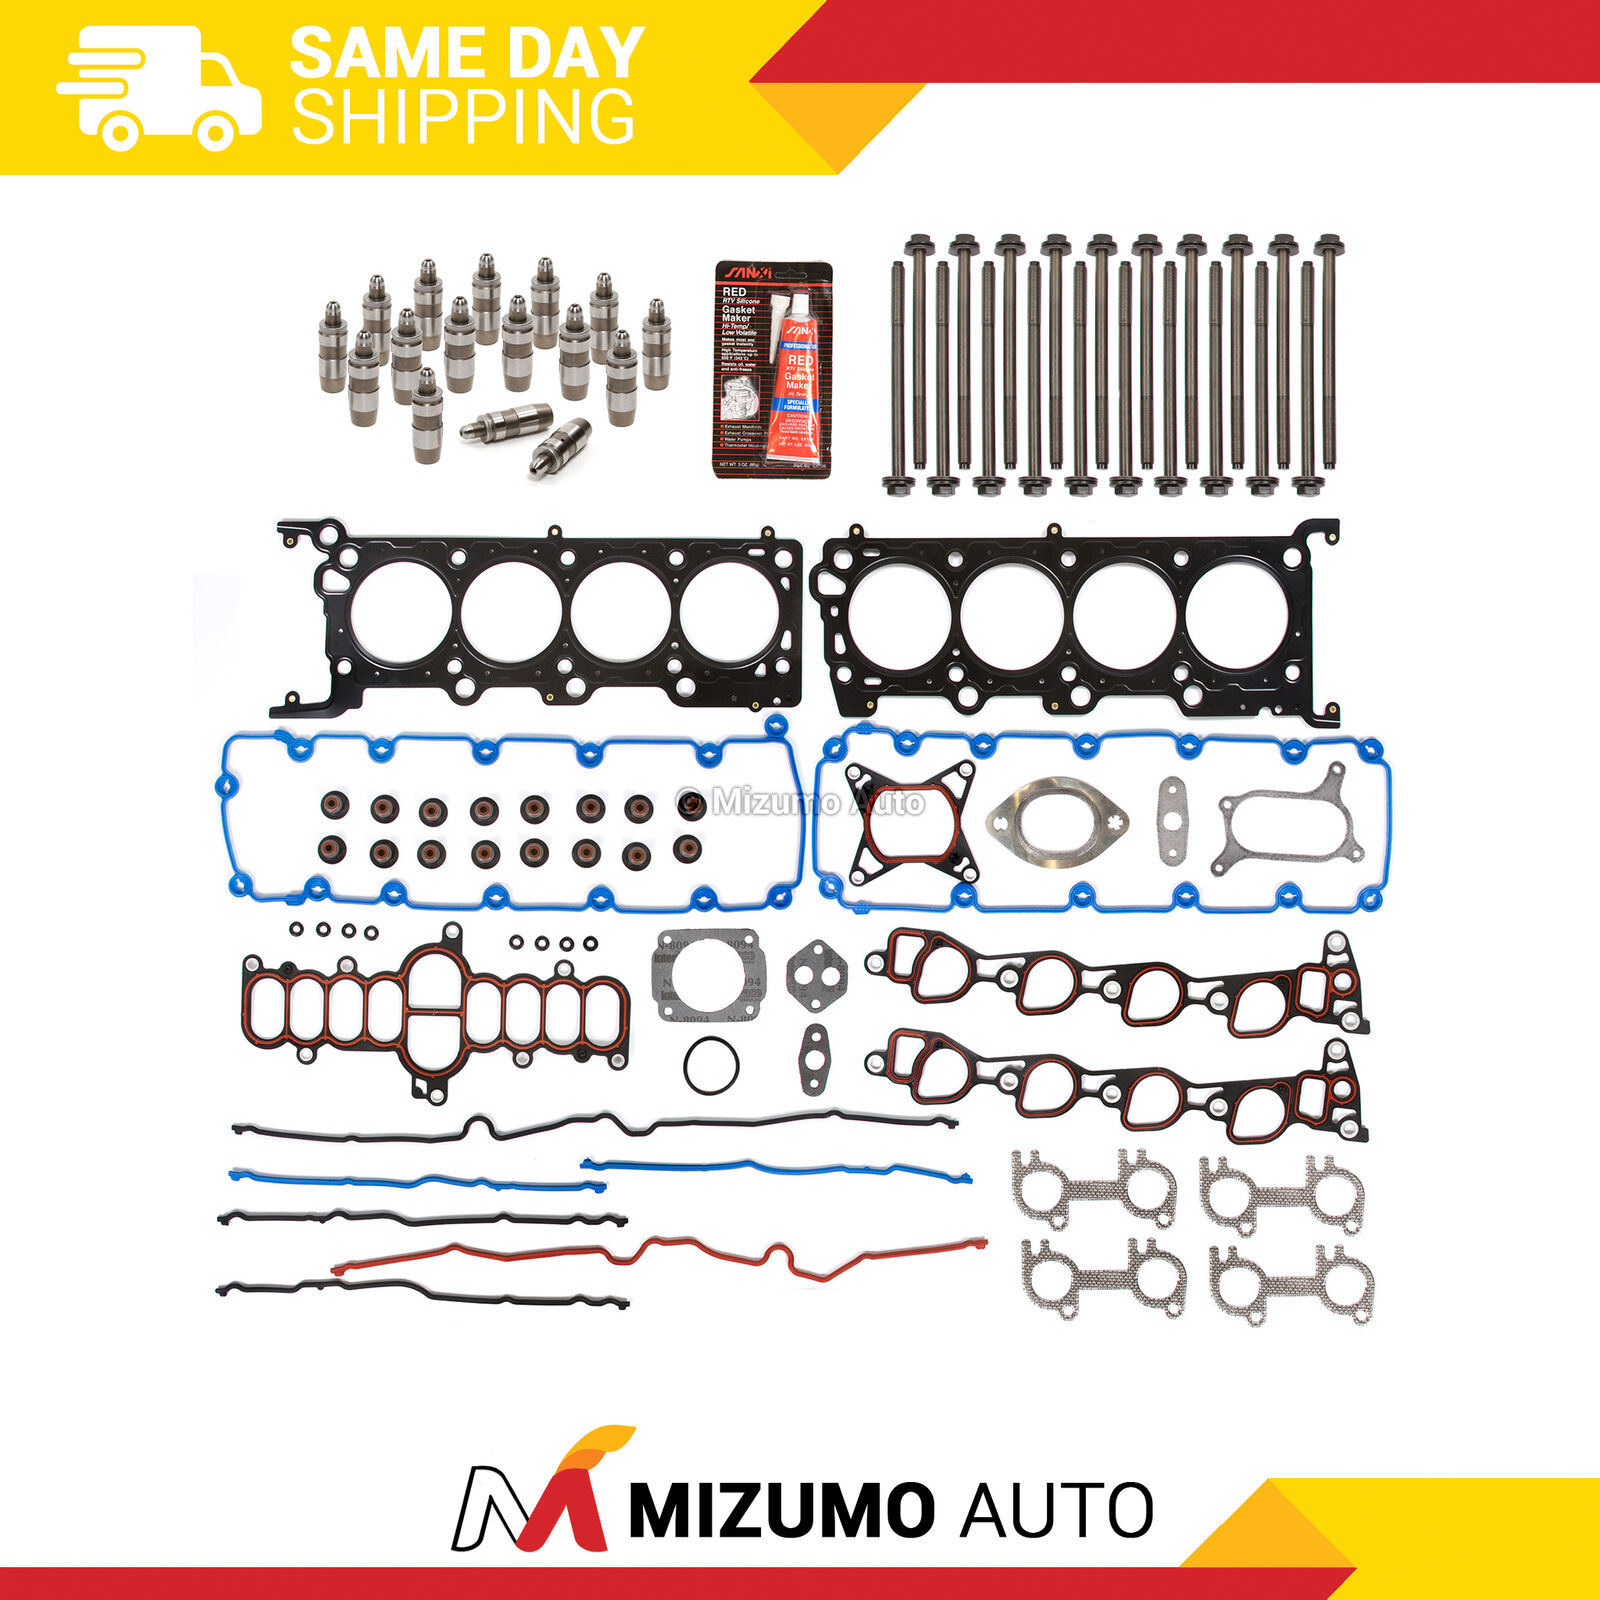 Head Gasket Set Bolts Lifters Fit 96-98 Ford Mustang Crown Victoria Mercury 4.6